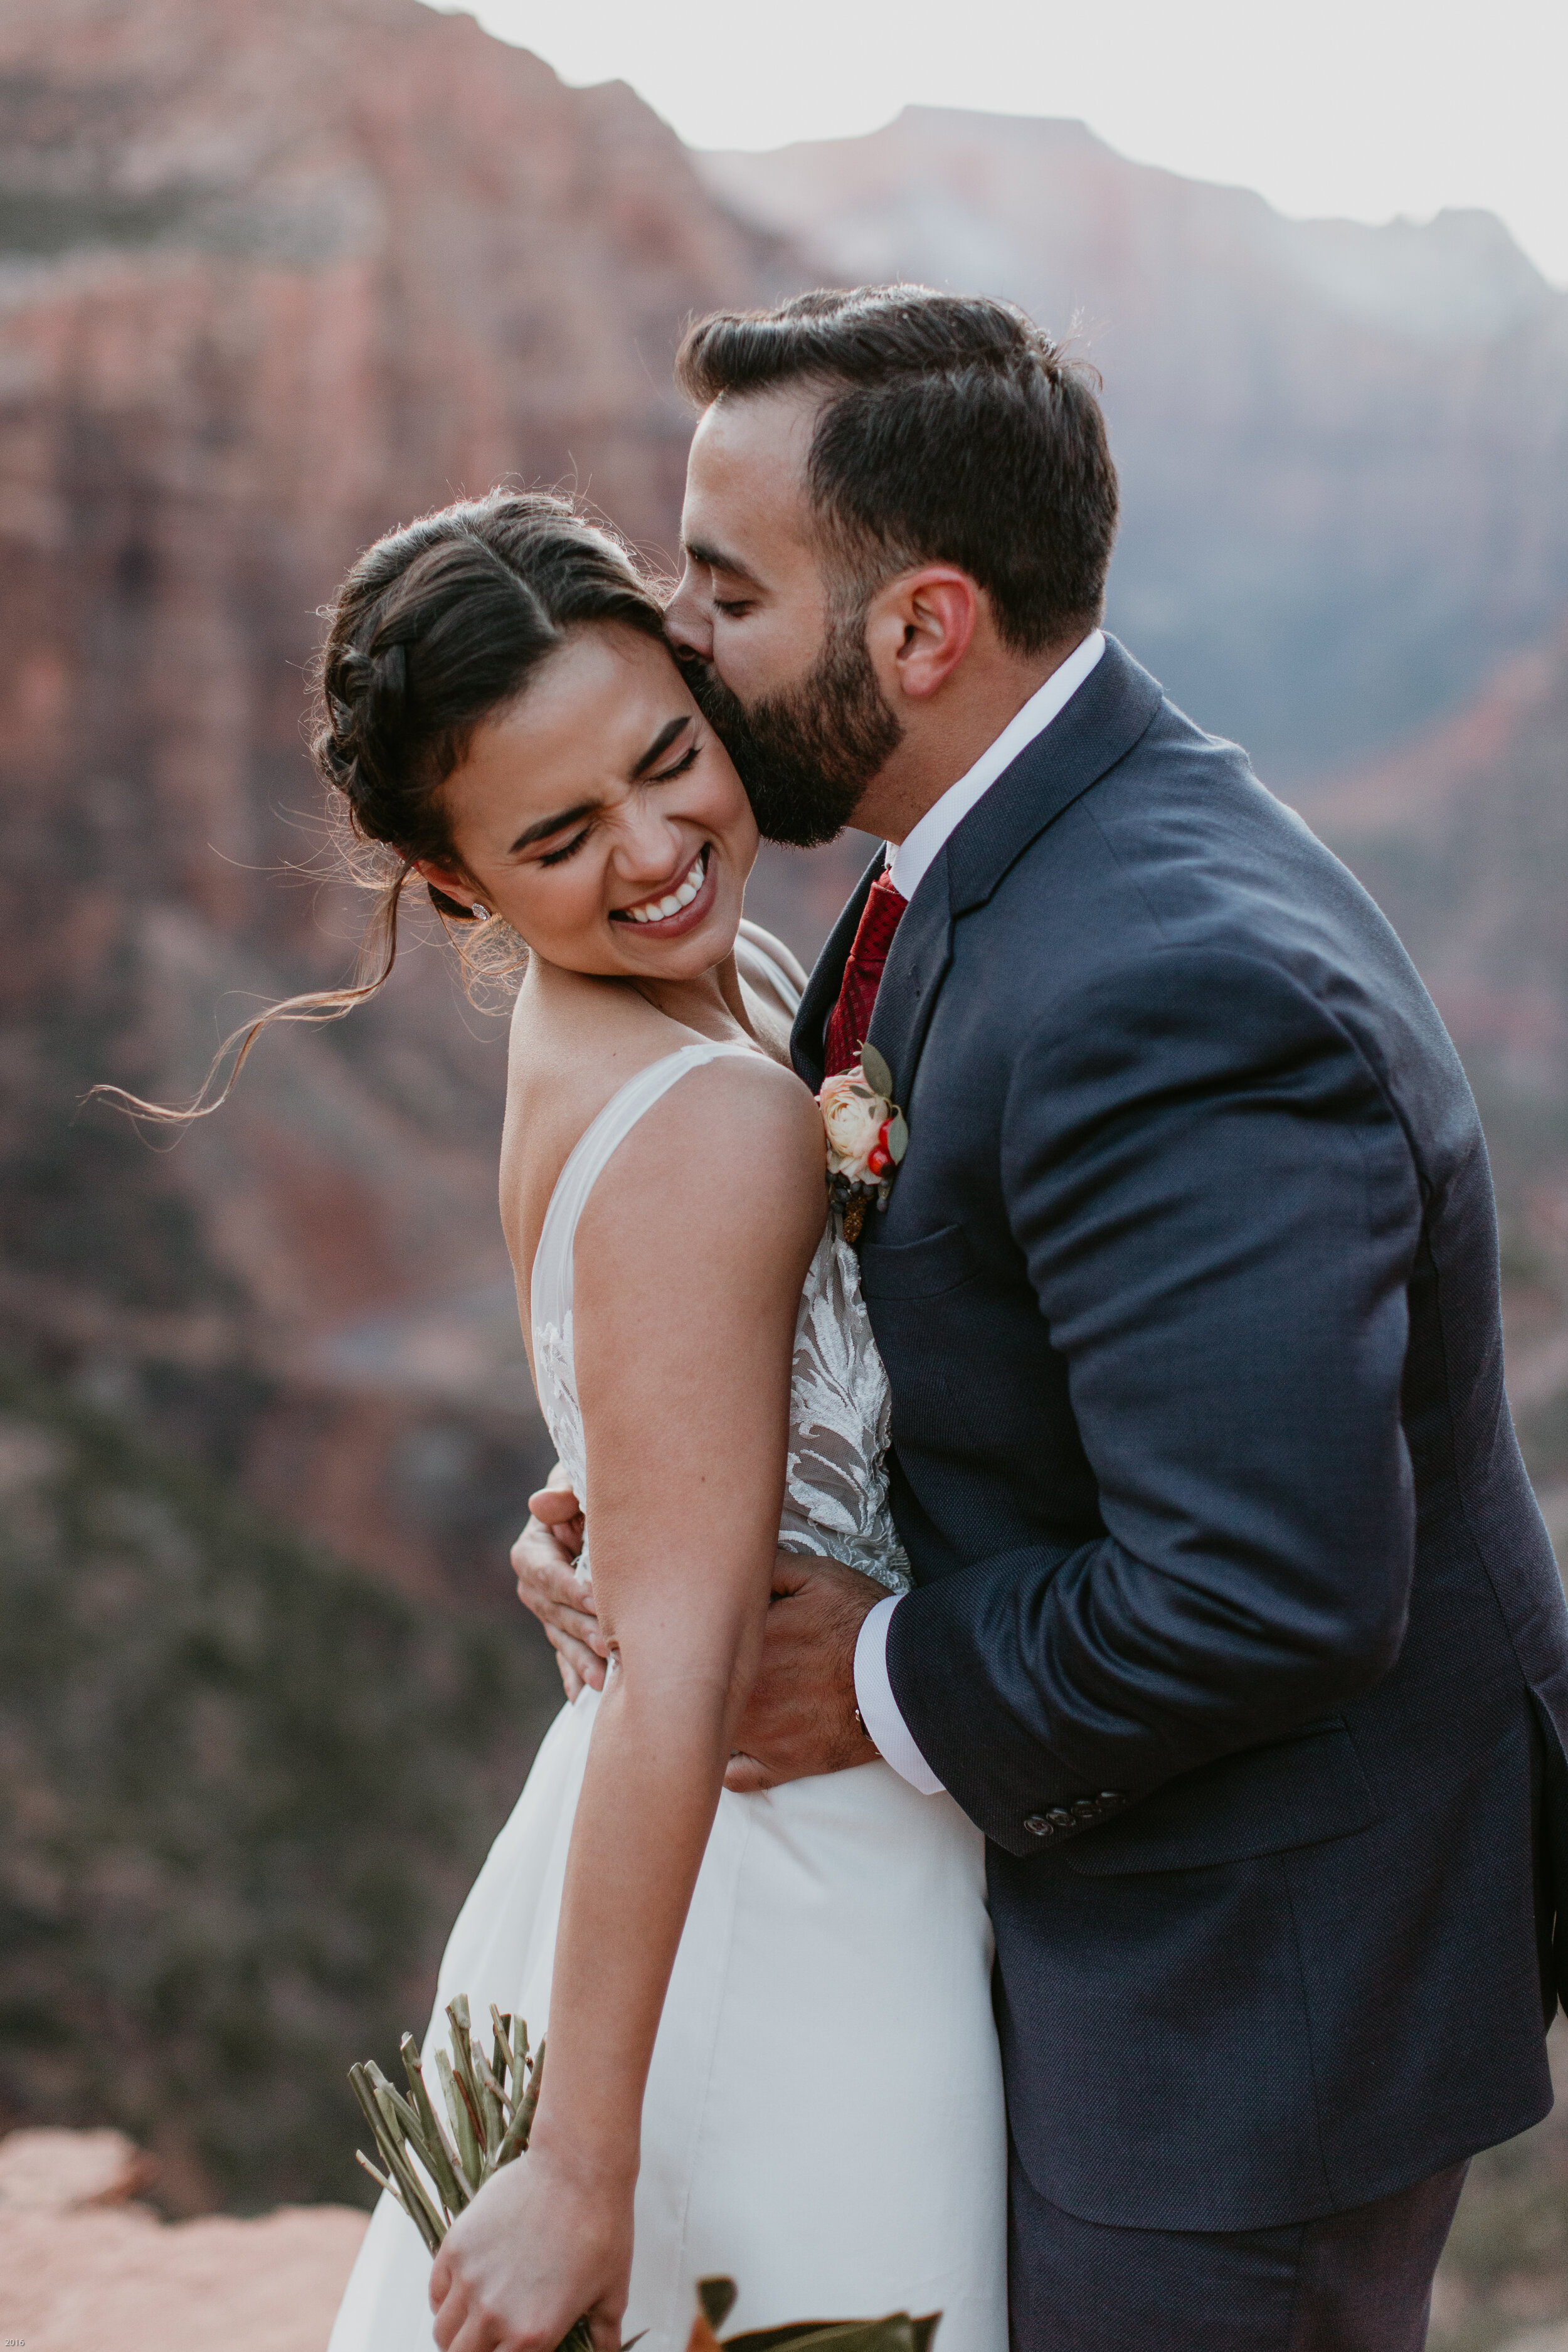 Nicole-Daacke-Photography-snowy-hiking-elopement-in-zion-national-park-zion-elopement-photographer-canyon-overlook-trial-brial-portraits-in-mt-zion-national-park-utah-desert-adventure-elopement-photographer-153.jpg